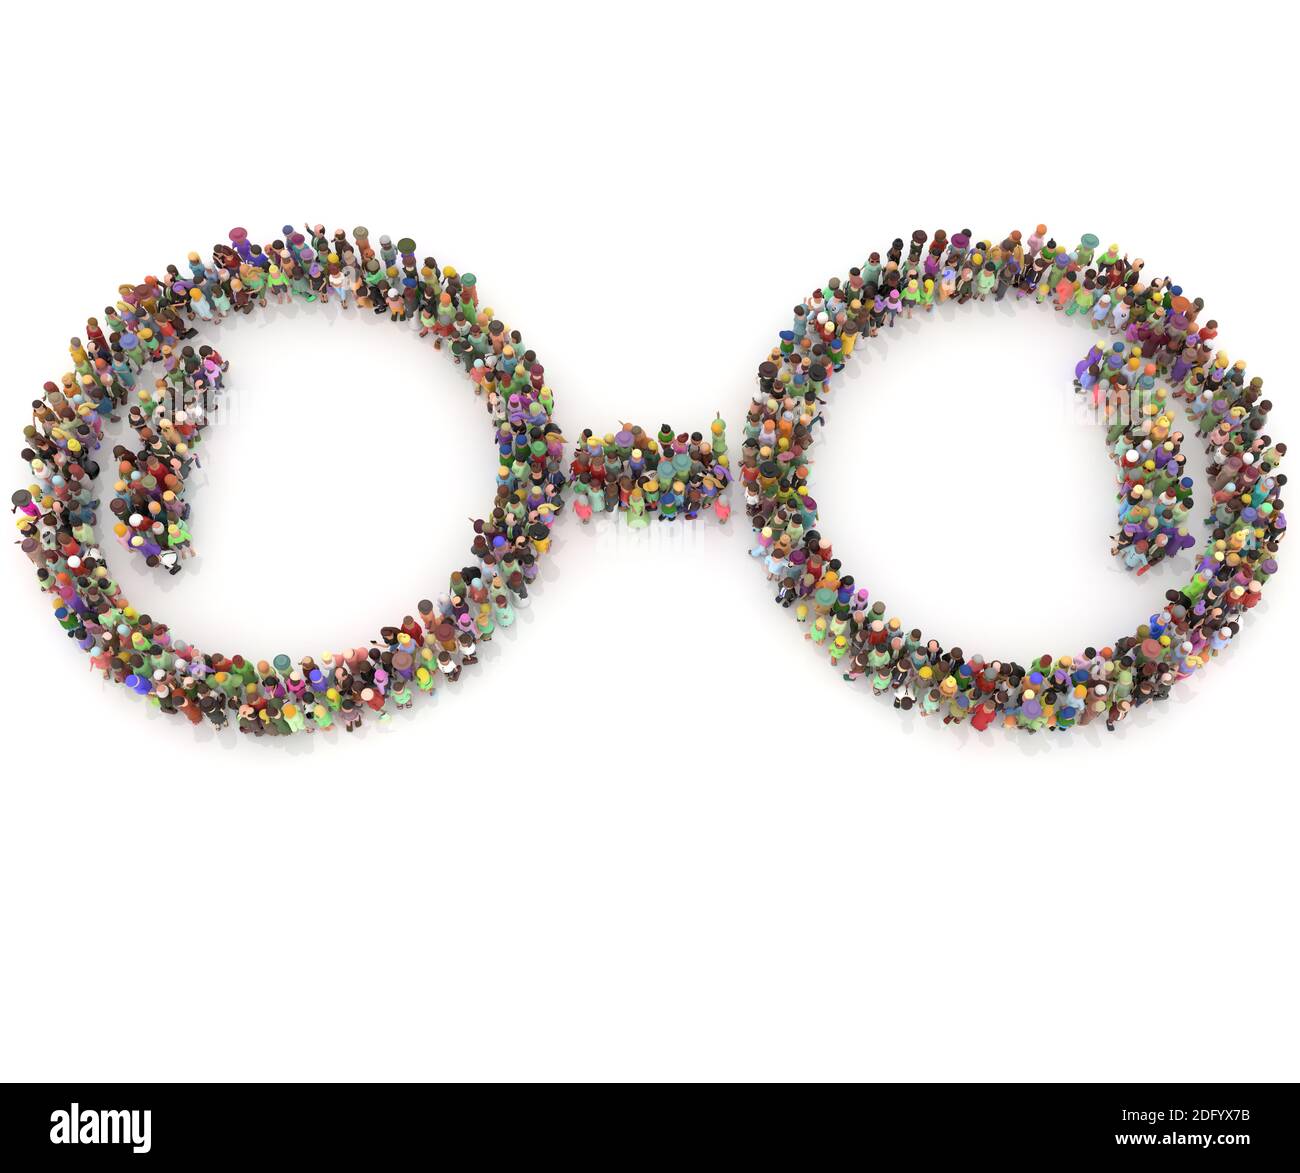 Large crowd of people 3D rendered seen from above in the shape of a glasses Stock Photo